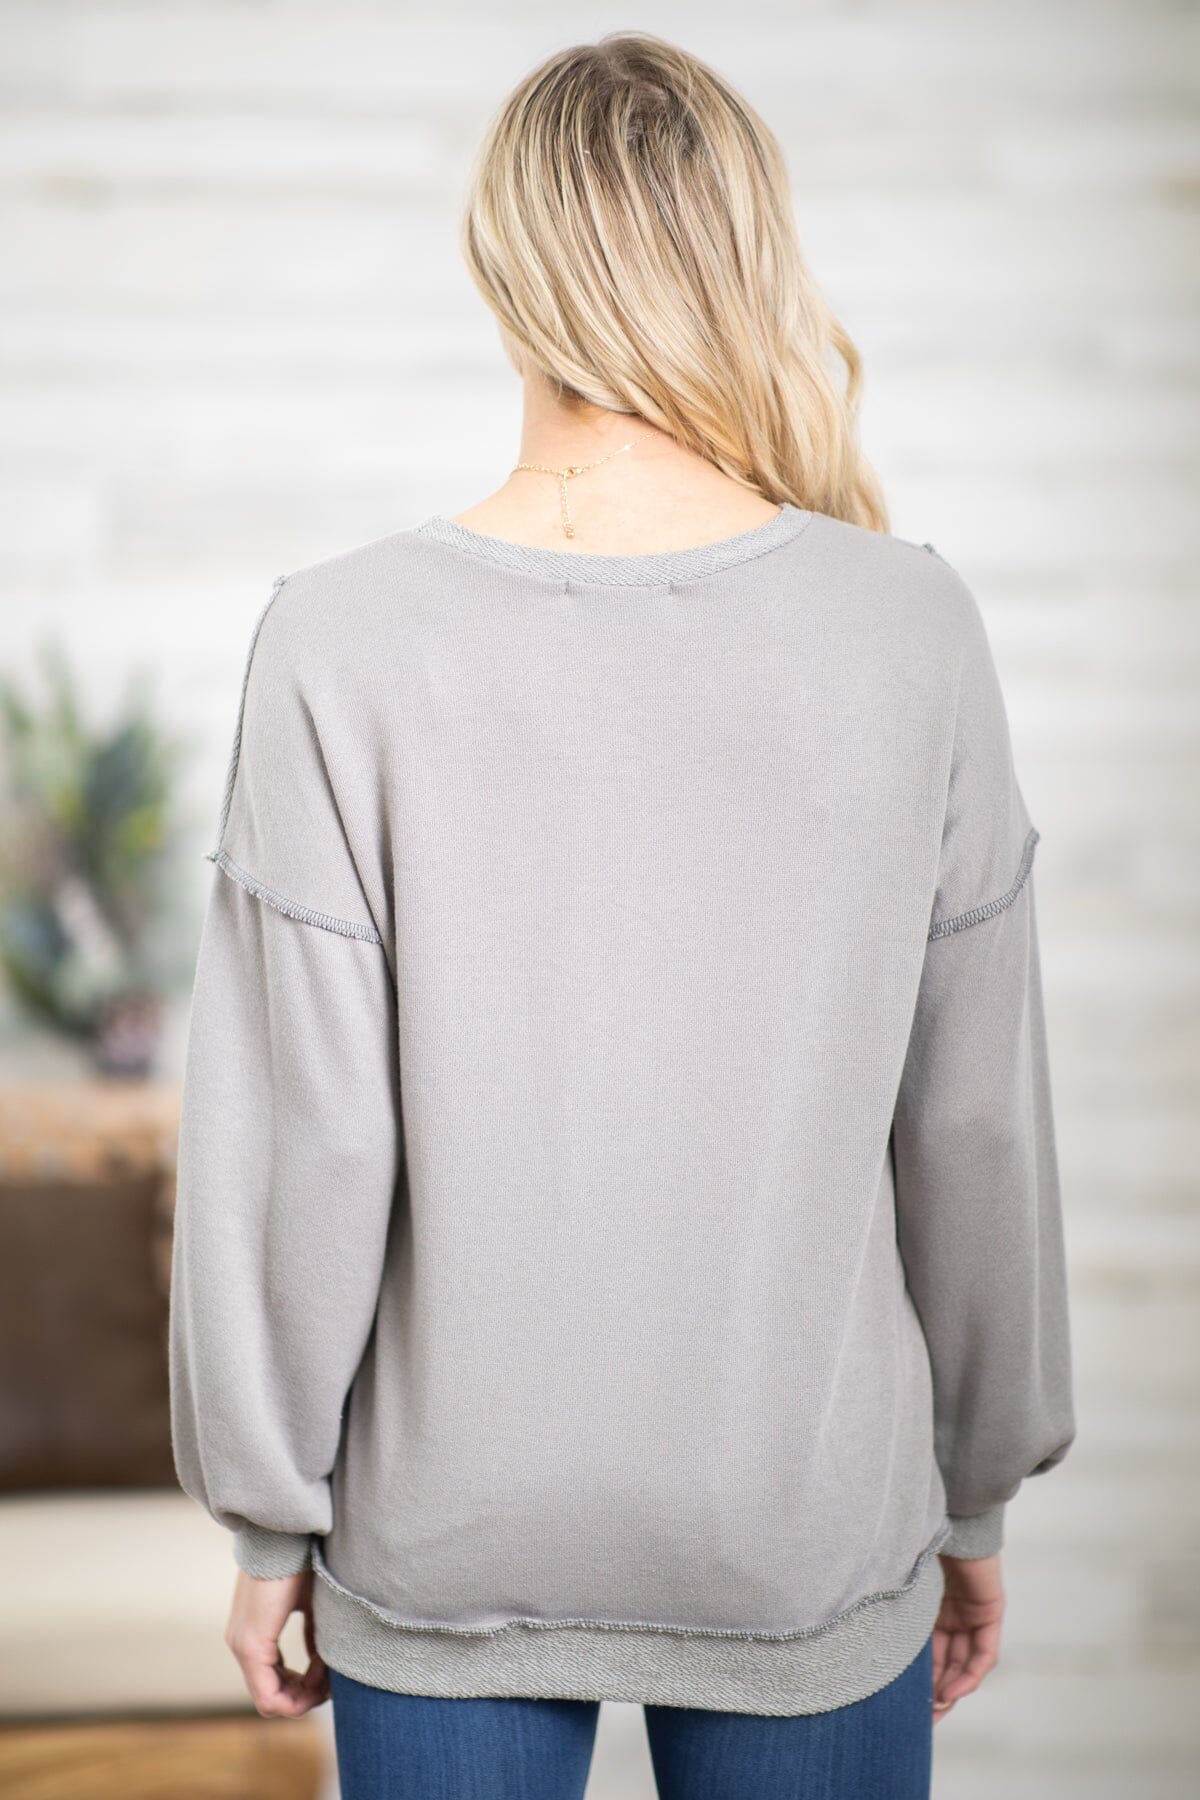 Grey Contrast Stitch Seam Top - Filly Flair